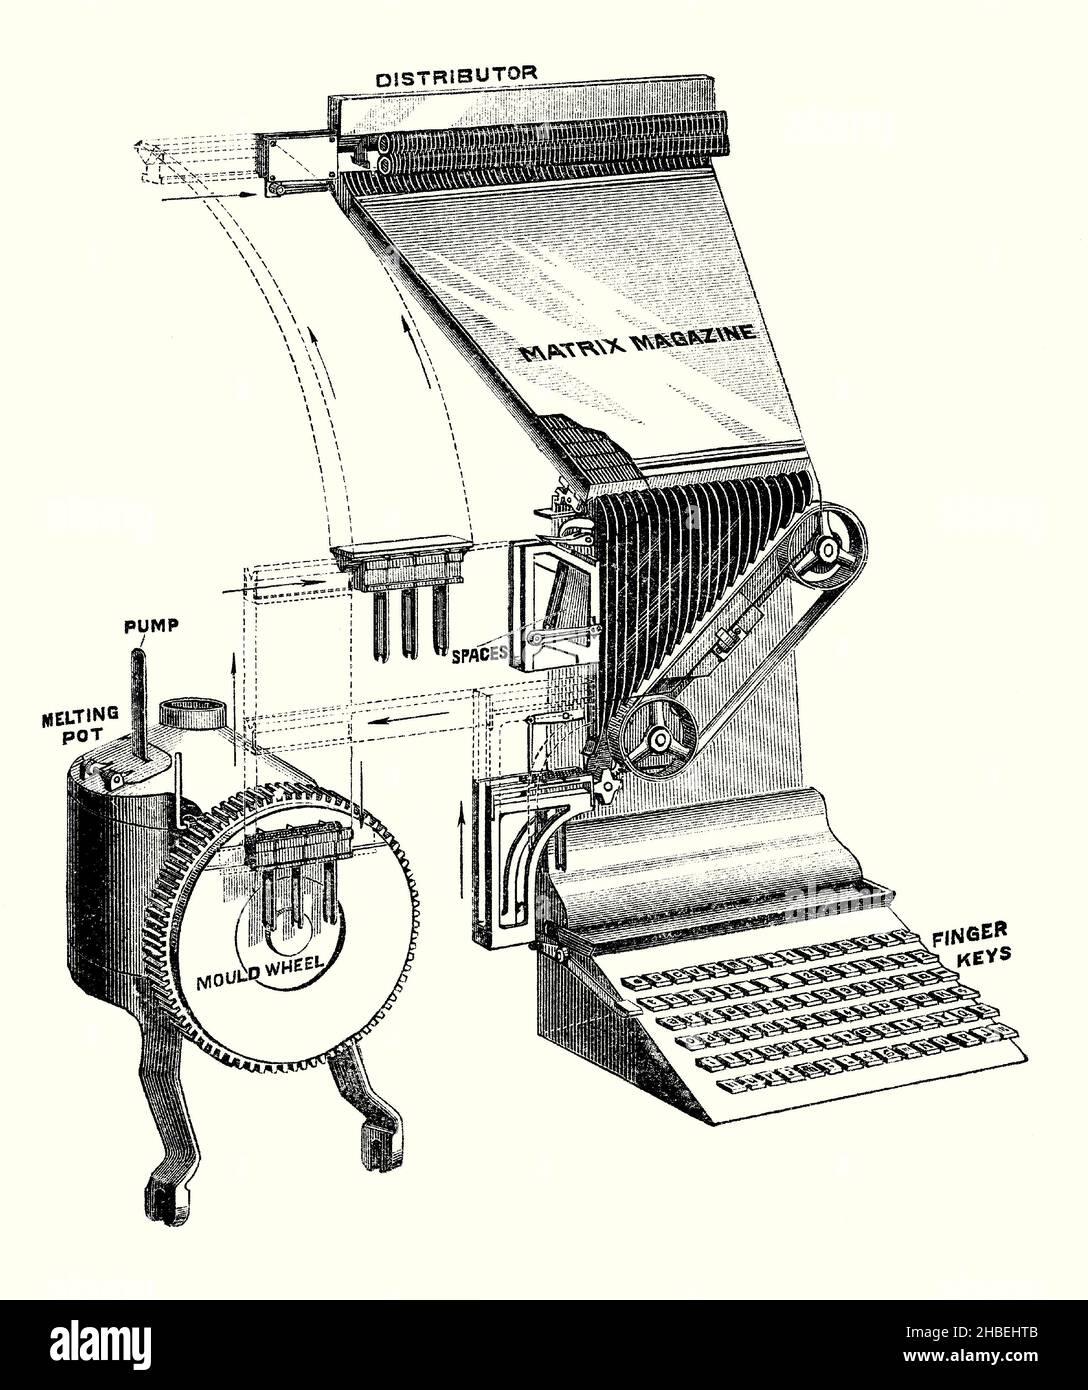 An old engraving showing the main moving parts of a Linotype machine of the late 1800s. It is from a Victorian book of the 1890s on discoveries and inventions during the 1800s. The Linotype machine is a ‘line casting’ machine used in printing text. It was a hot metal typesetting system that cast blocks of metal type for individual uses. Ottmar Mergenthaler invented it in 1884. Linotype became the main method to set type, especially small-size body text, for newspapers, magazines, and books from the late 19th century to the 1970s and 1980s. Stock Photo